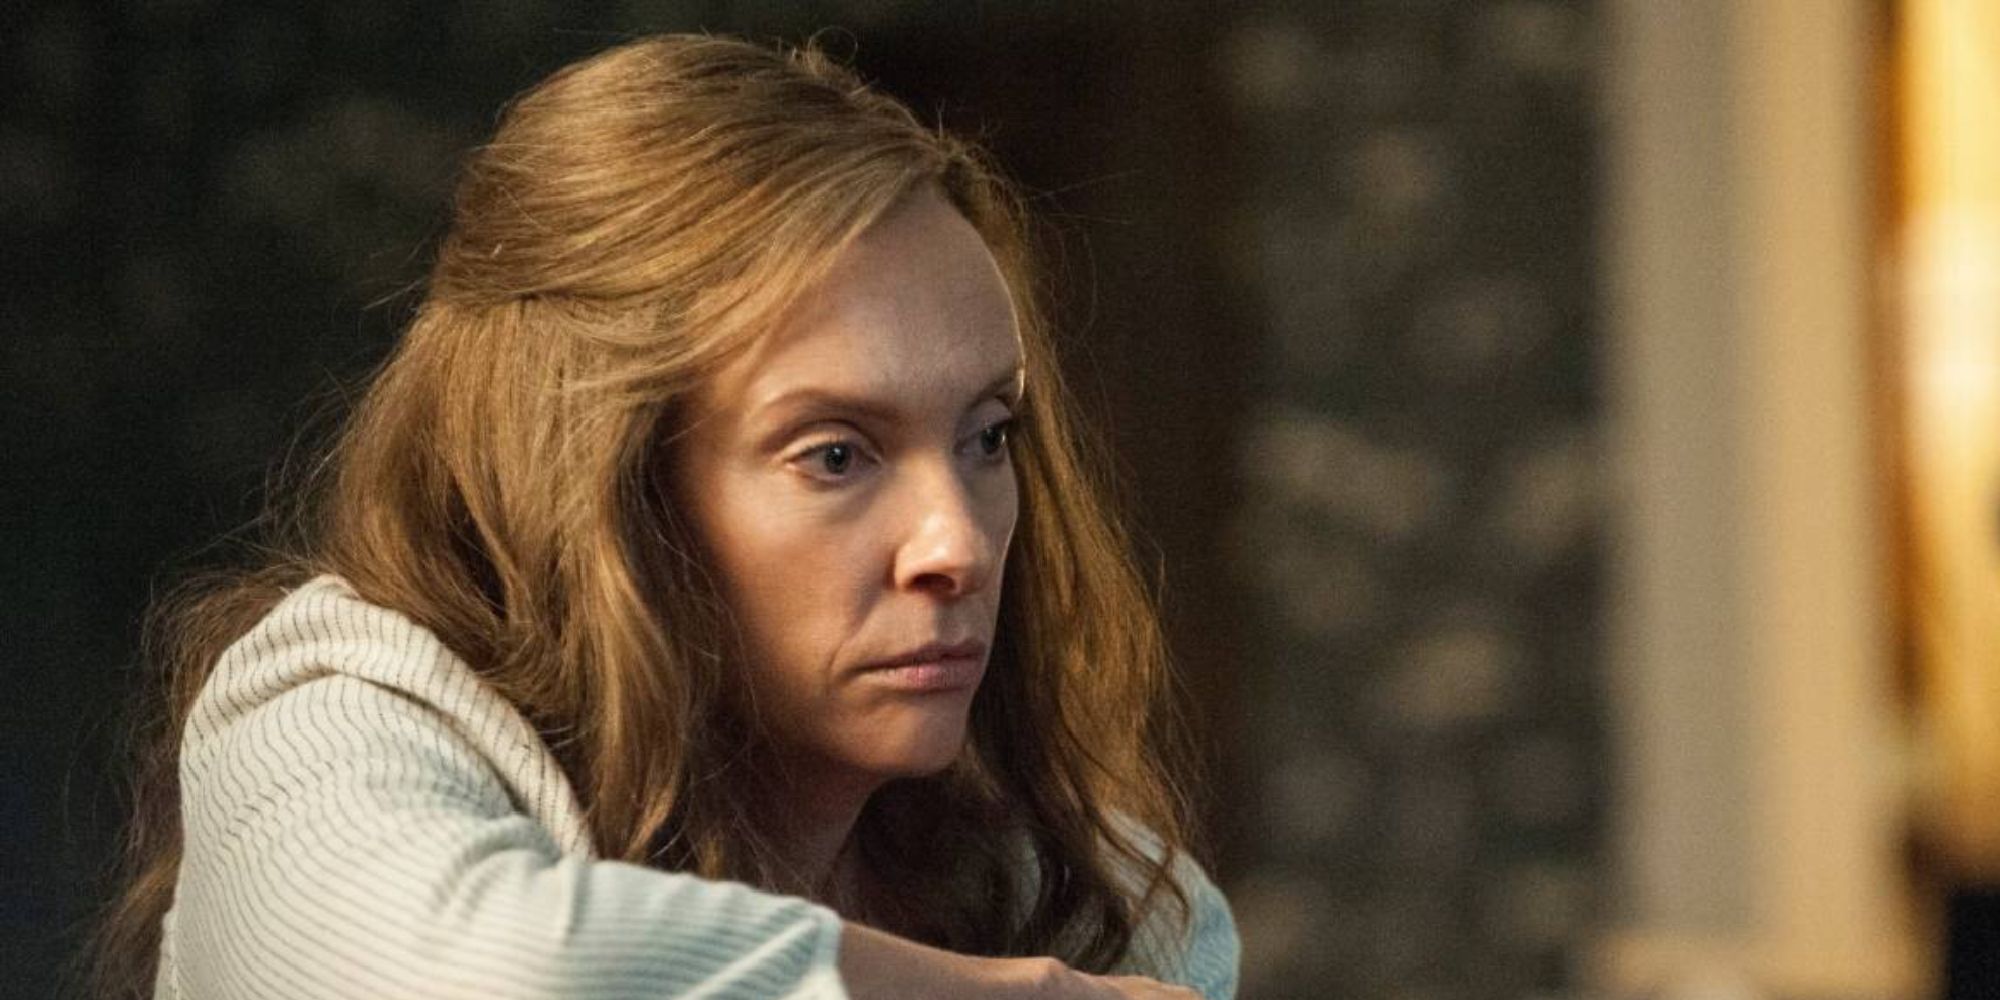 Toni Collette with deadpan expression on 'Hereditary'